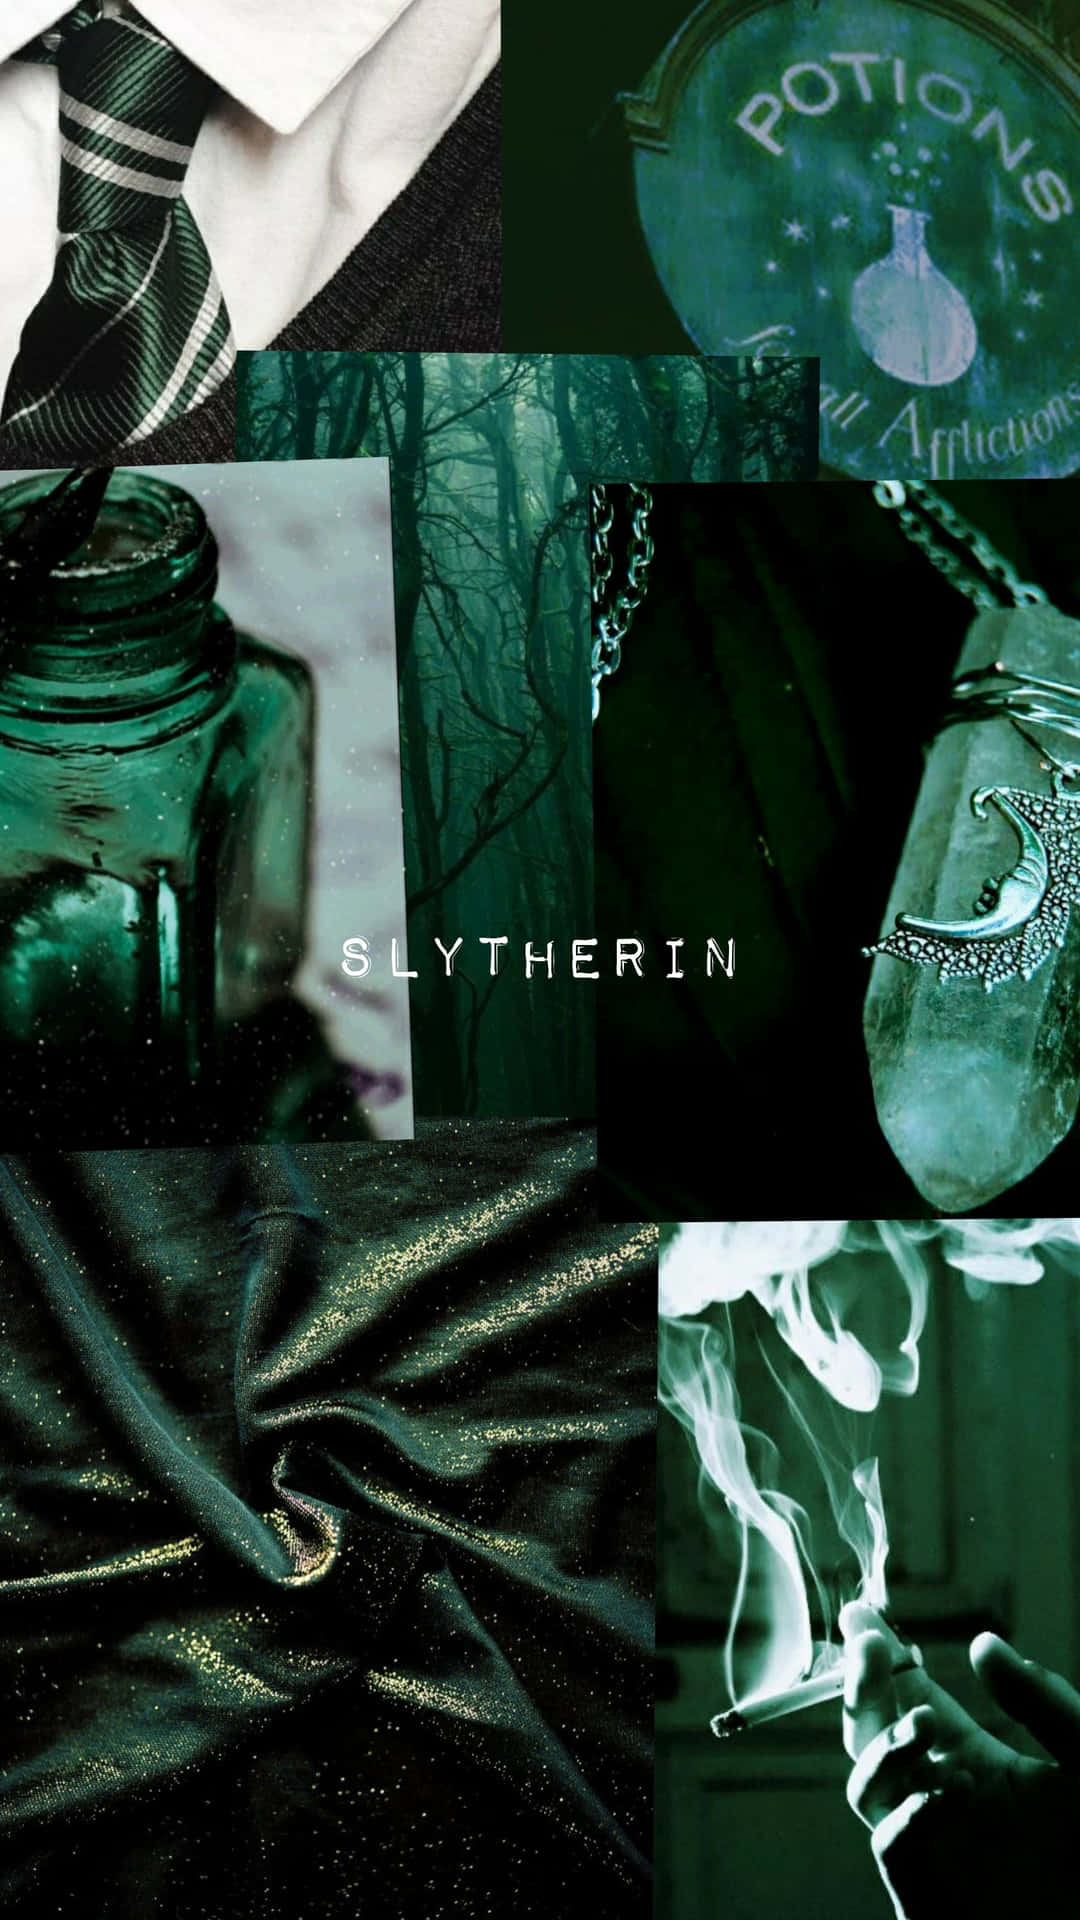 The Crest of Slytherin House